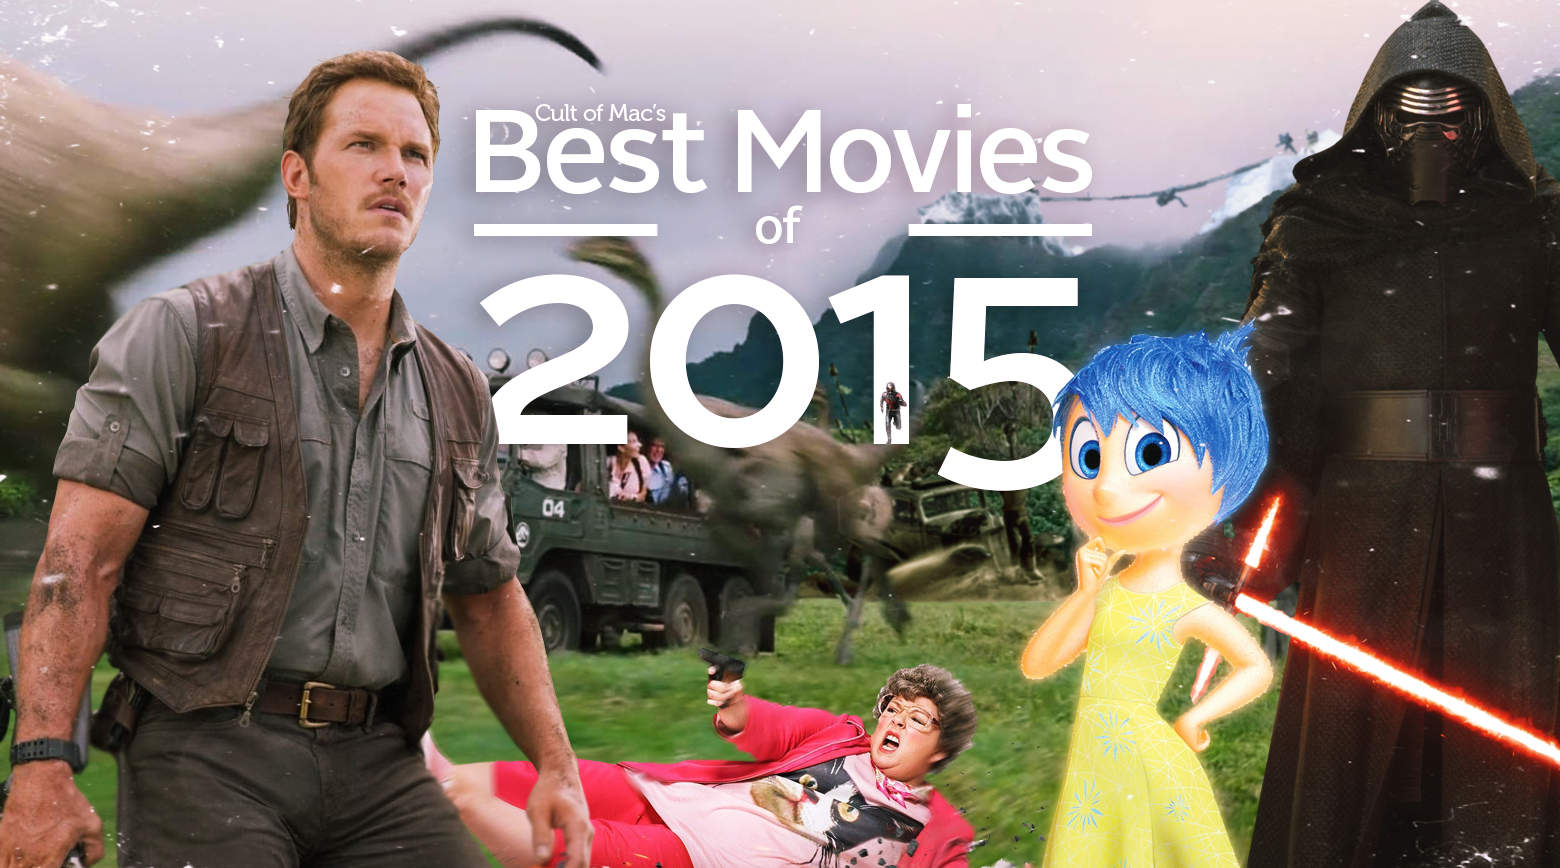 Best movies of 2015